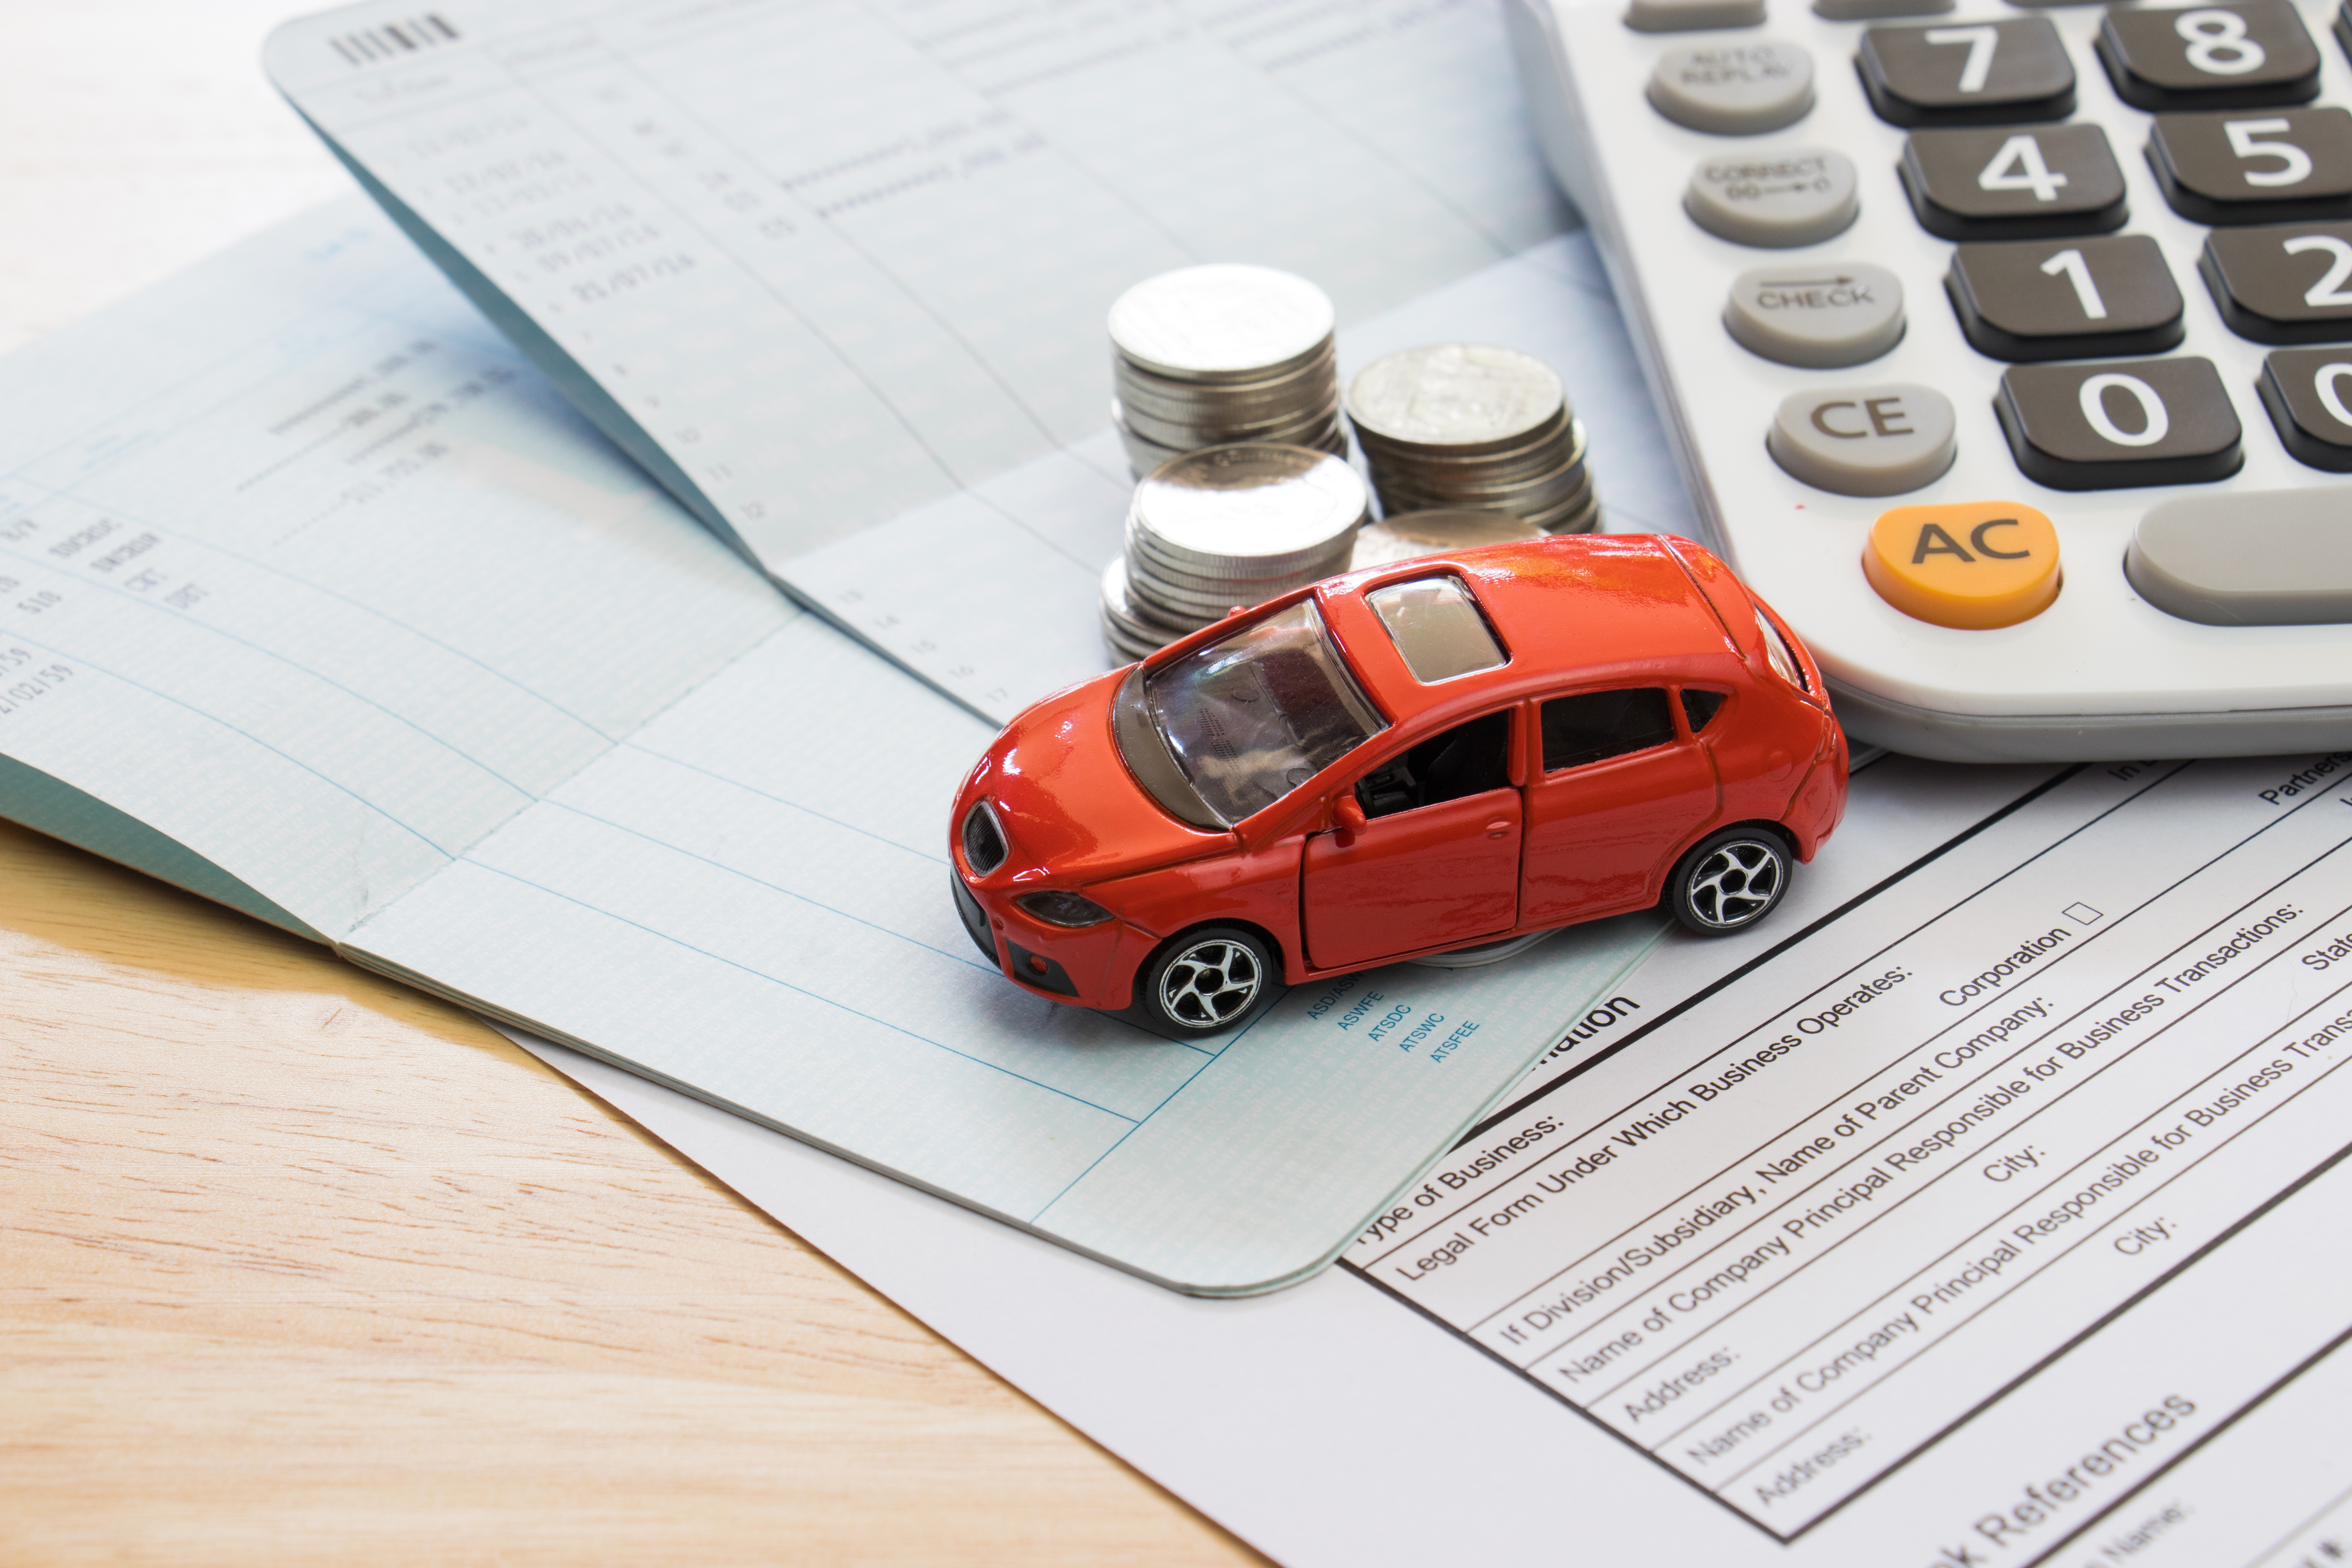 The 5 key factors that affect your car insurance rate